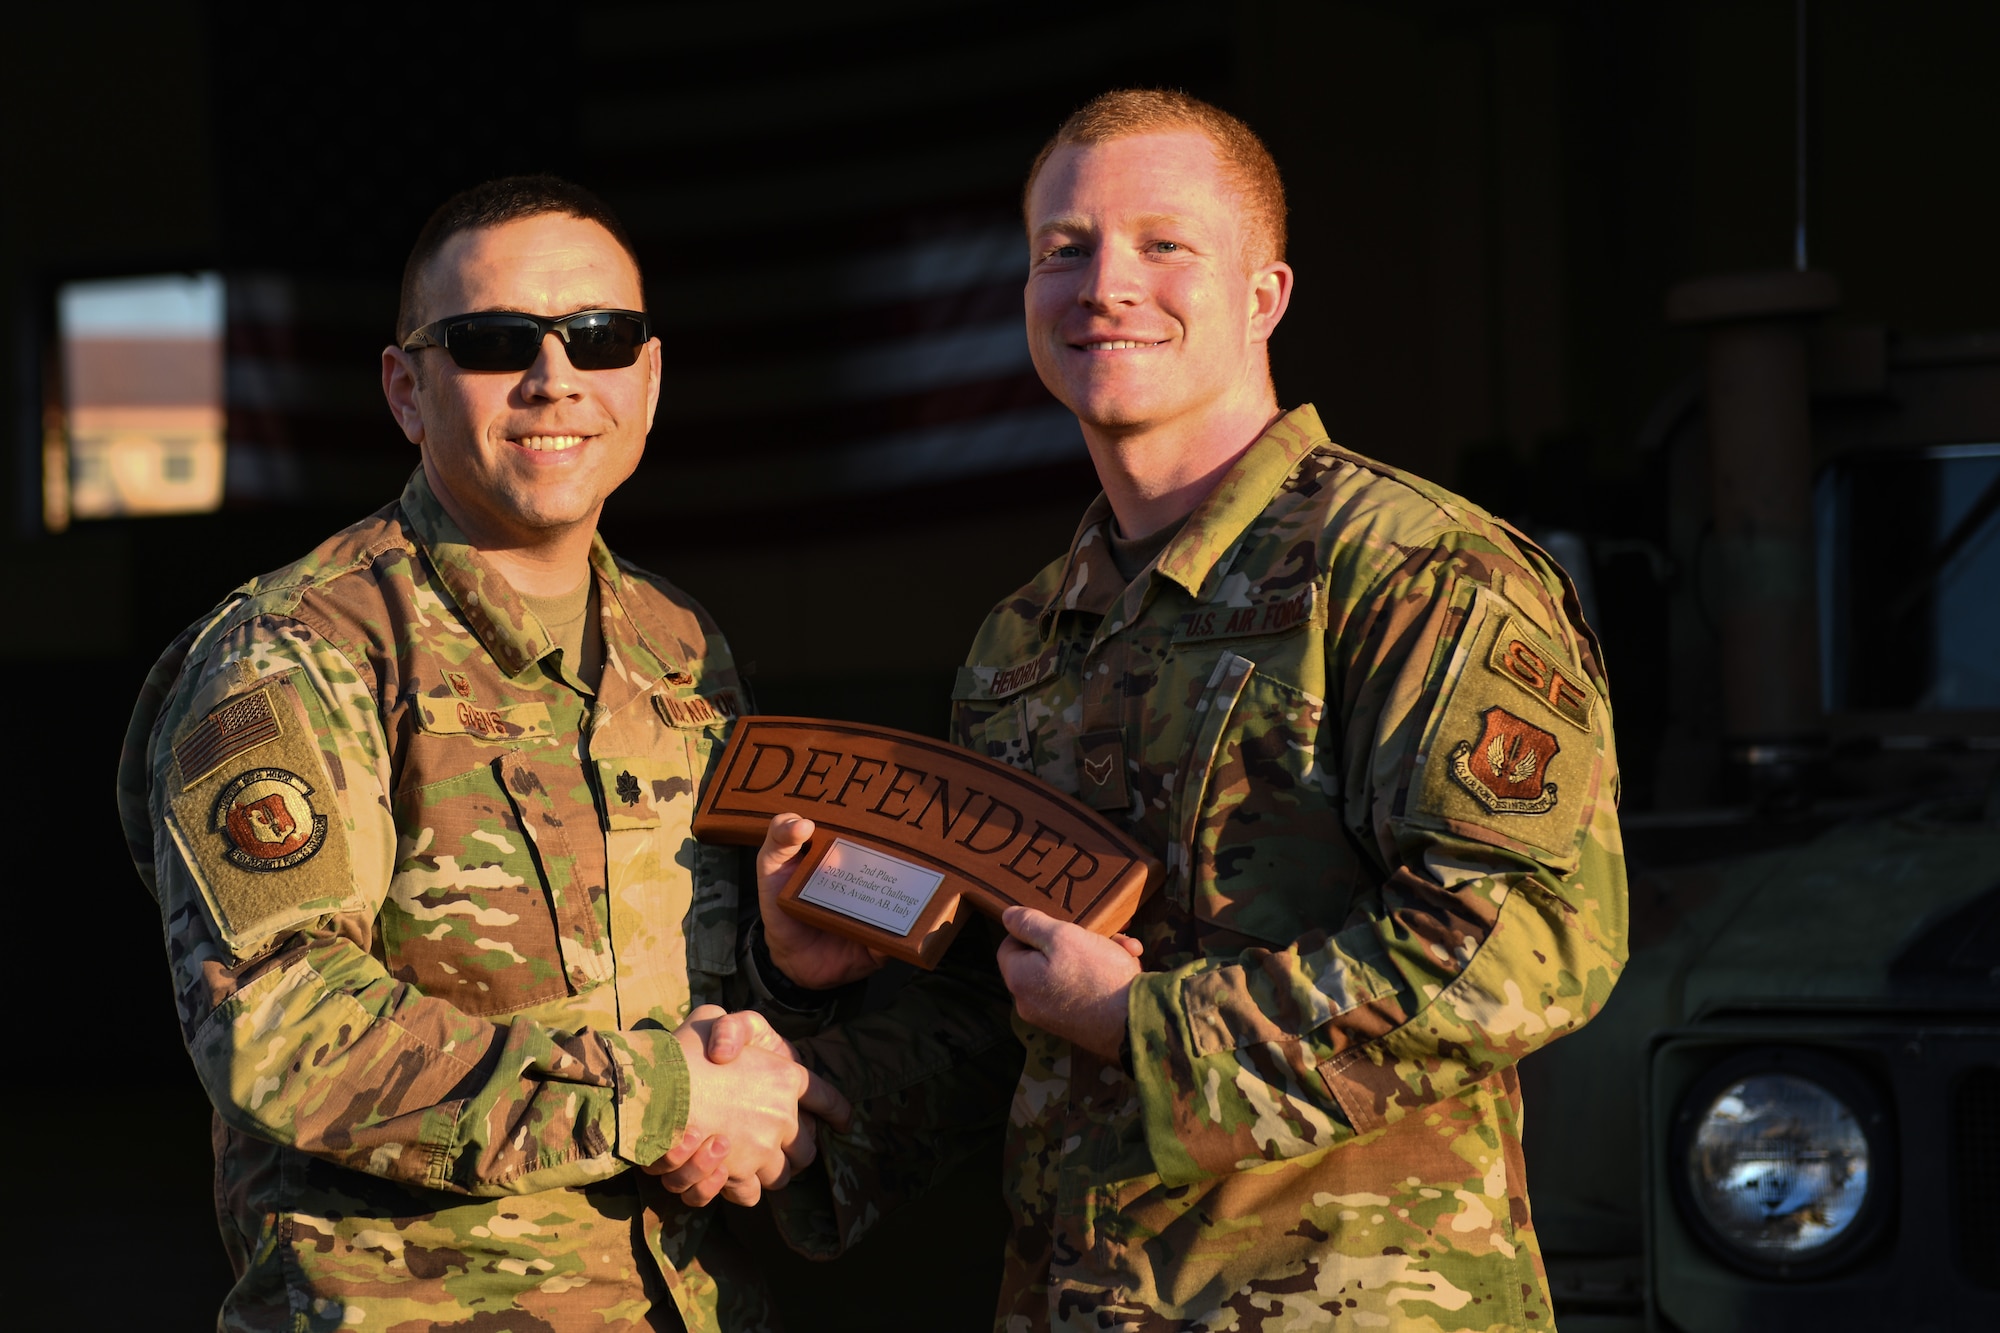 U.S. Air Force Lt. Col. Jesse Goens, 31st Security Forces Squadron commander, presents Aviano’s 2020 Defender Challenge award to U.S. Air Force Airman 1st Class Hunter B. Hendrix, 31st SFS member, at Aviano Air Base, Italy, Feb. 14, 2020. Hendrix won second place. (U.S. Air Force photo by Airman 1st Class Ericka A. Woolever)